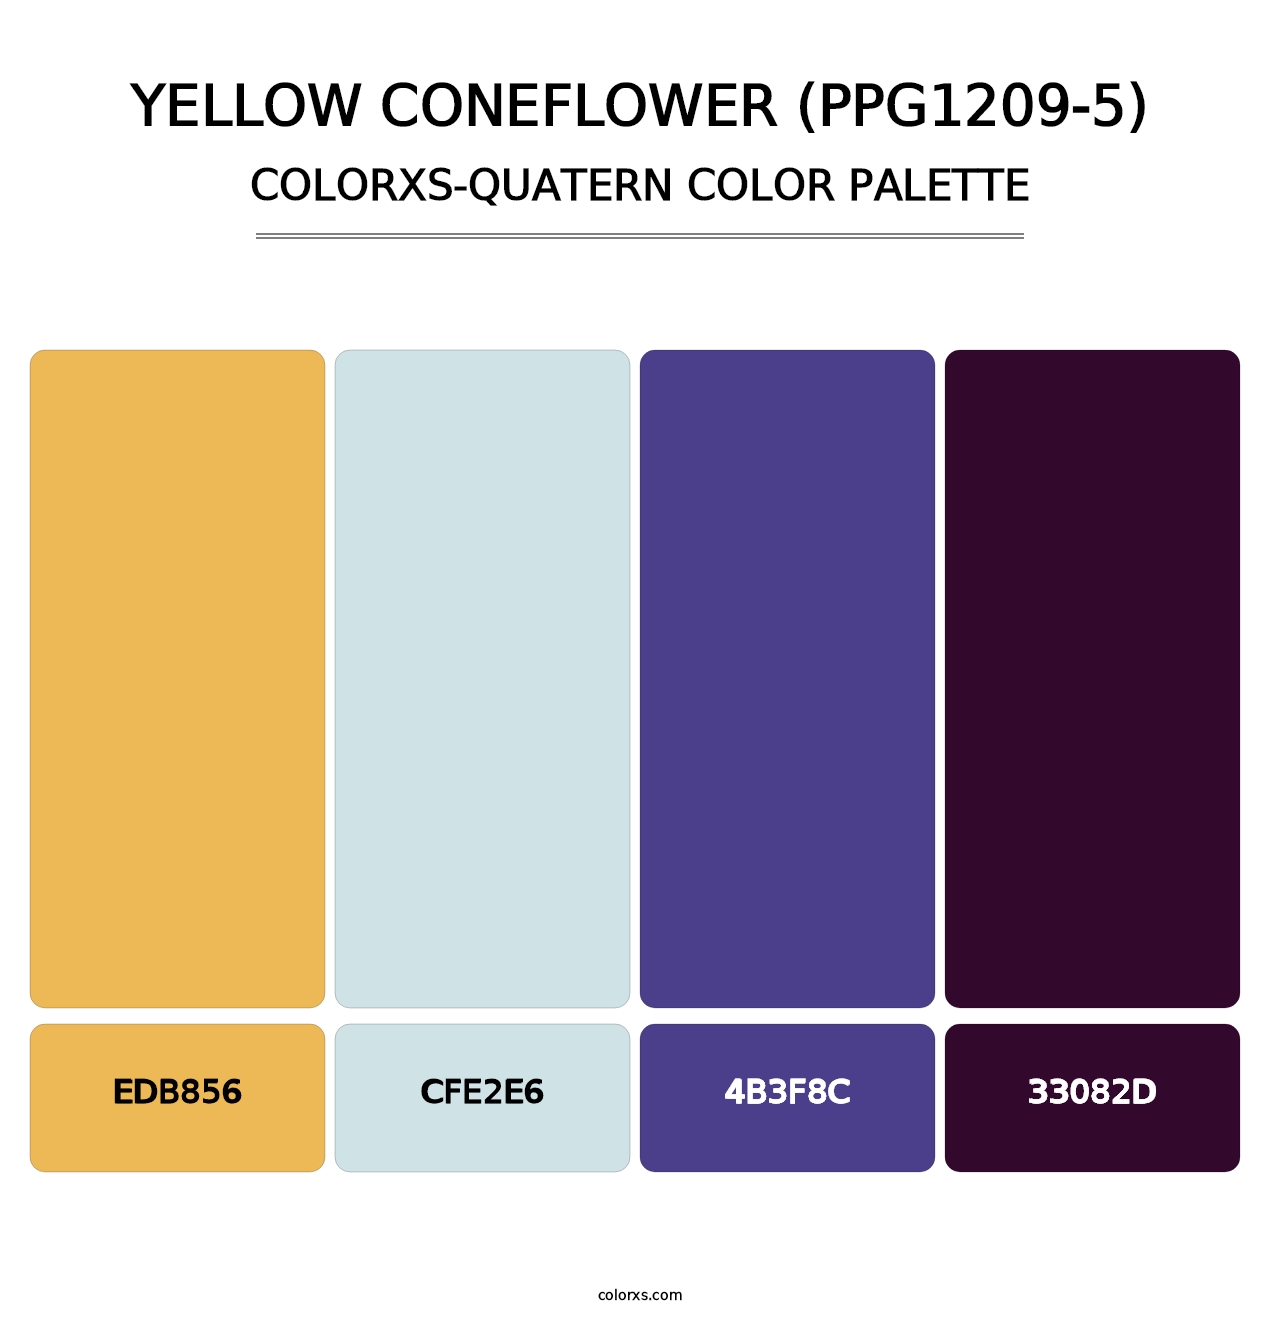 Yellow Coneflower (PPG1209-5) - Colorxs Quatern Palette